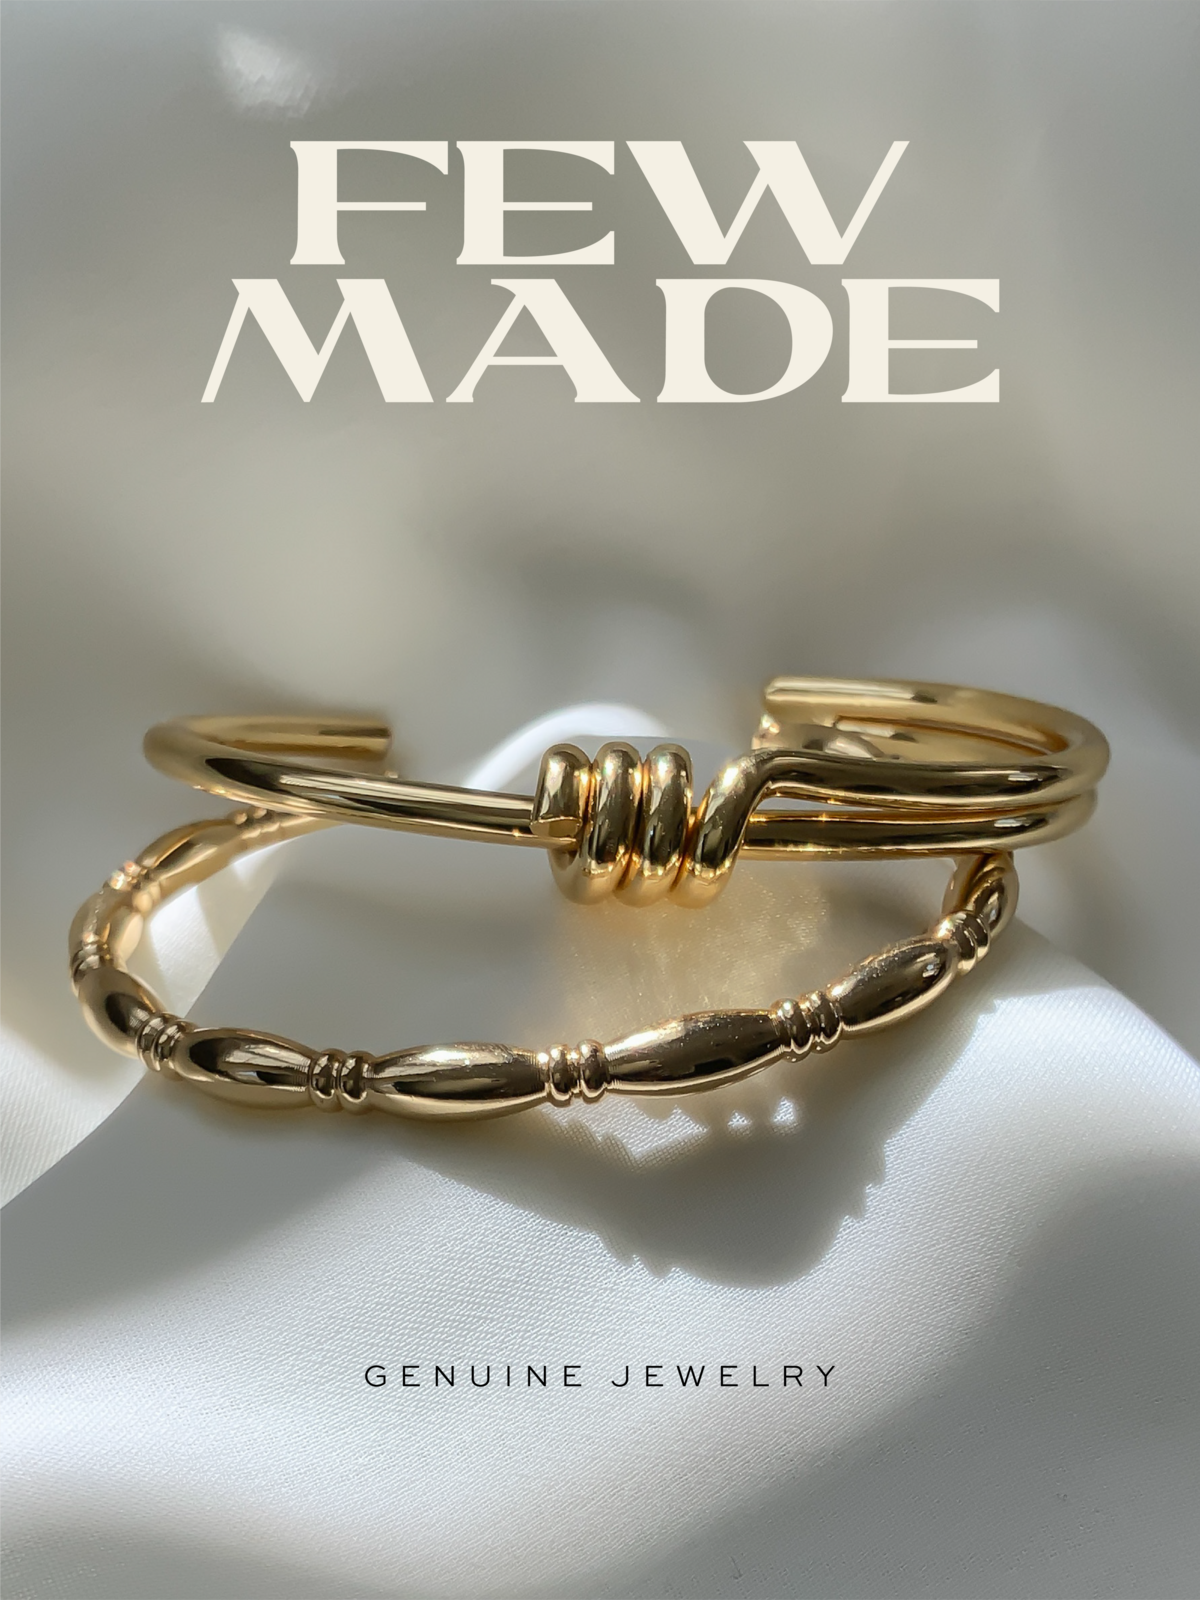 Few Made Jewelry_Library of Brands-16